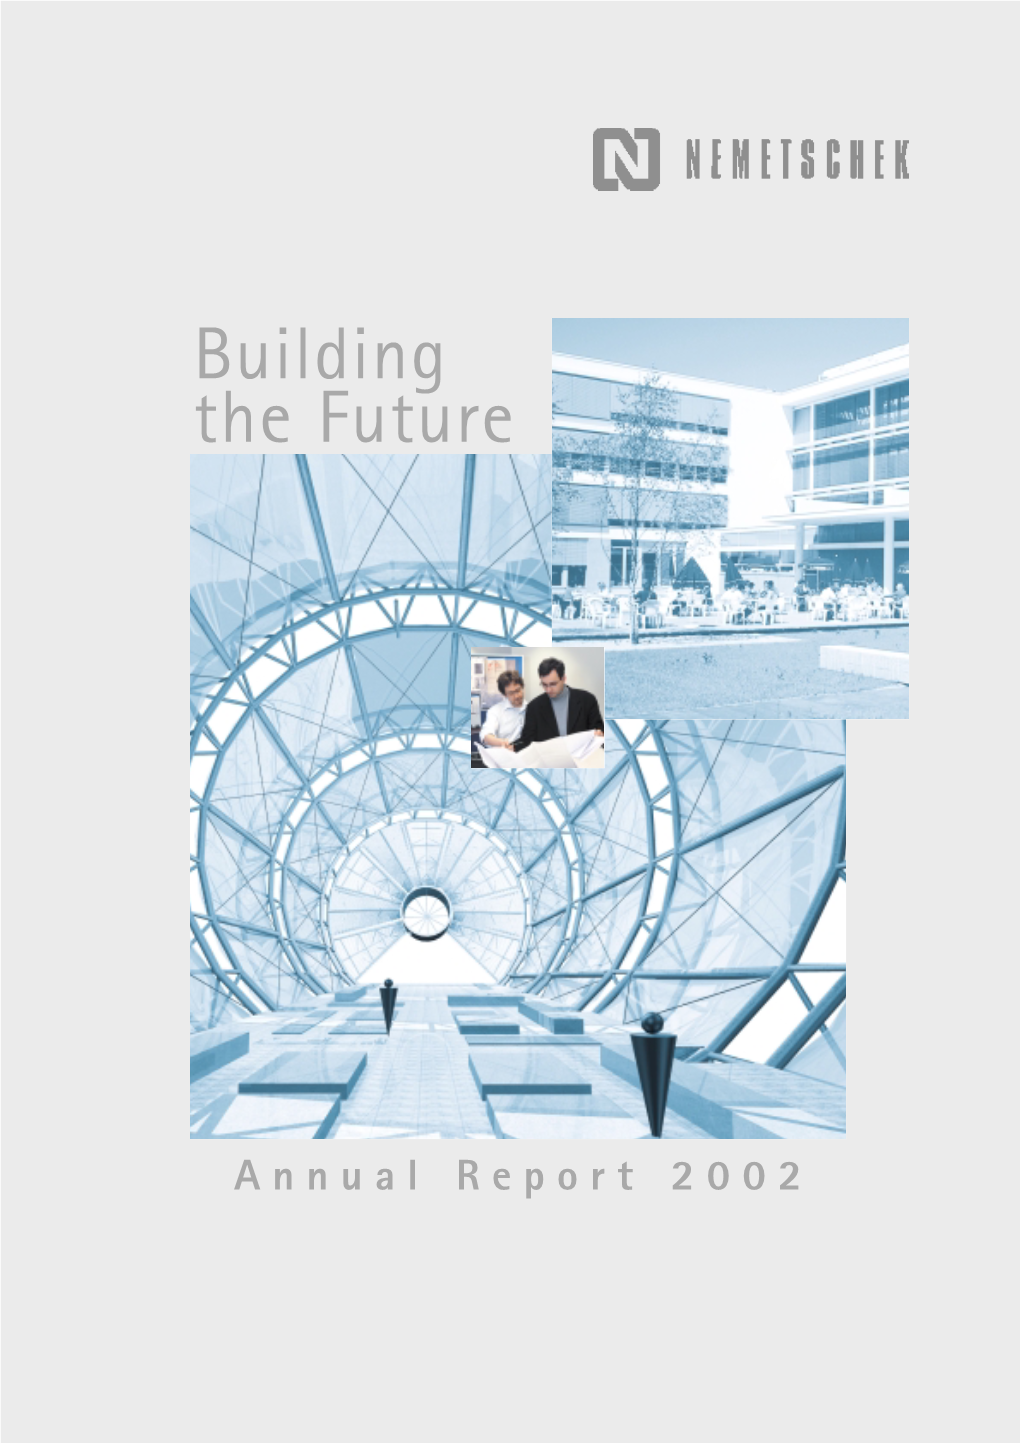 Annual Report 2002 13.02.2003 1.57 MB